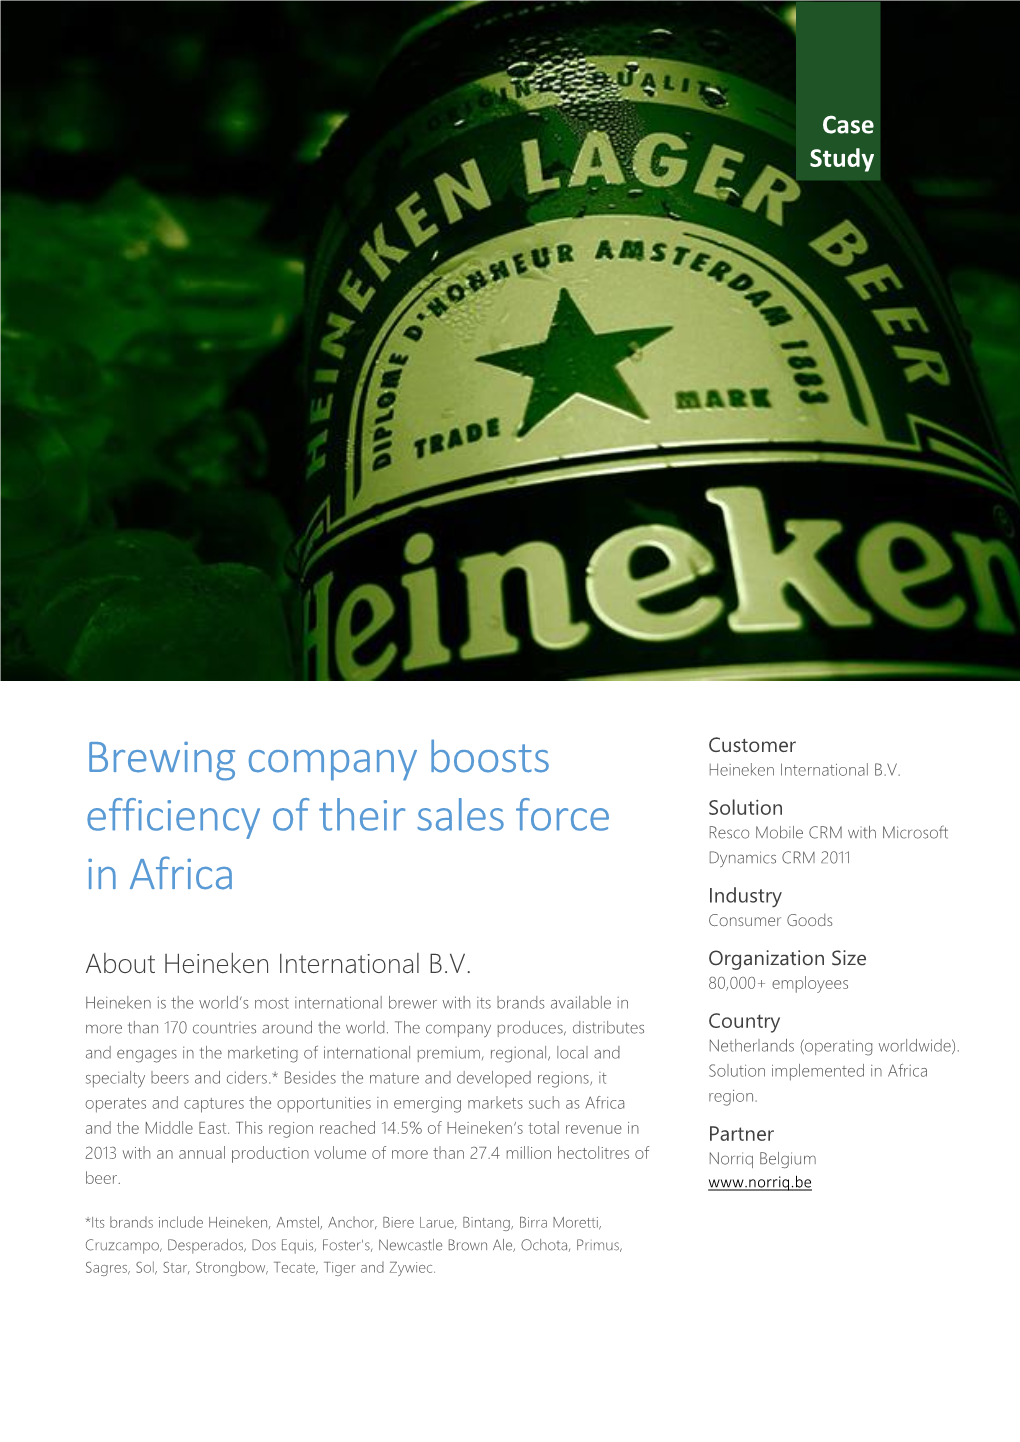 Brewing Company Boosts Efficiency of Their Sales Force in Africa